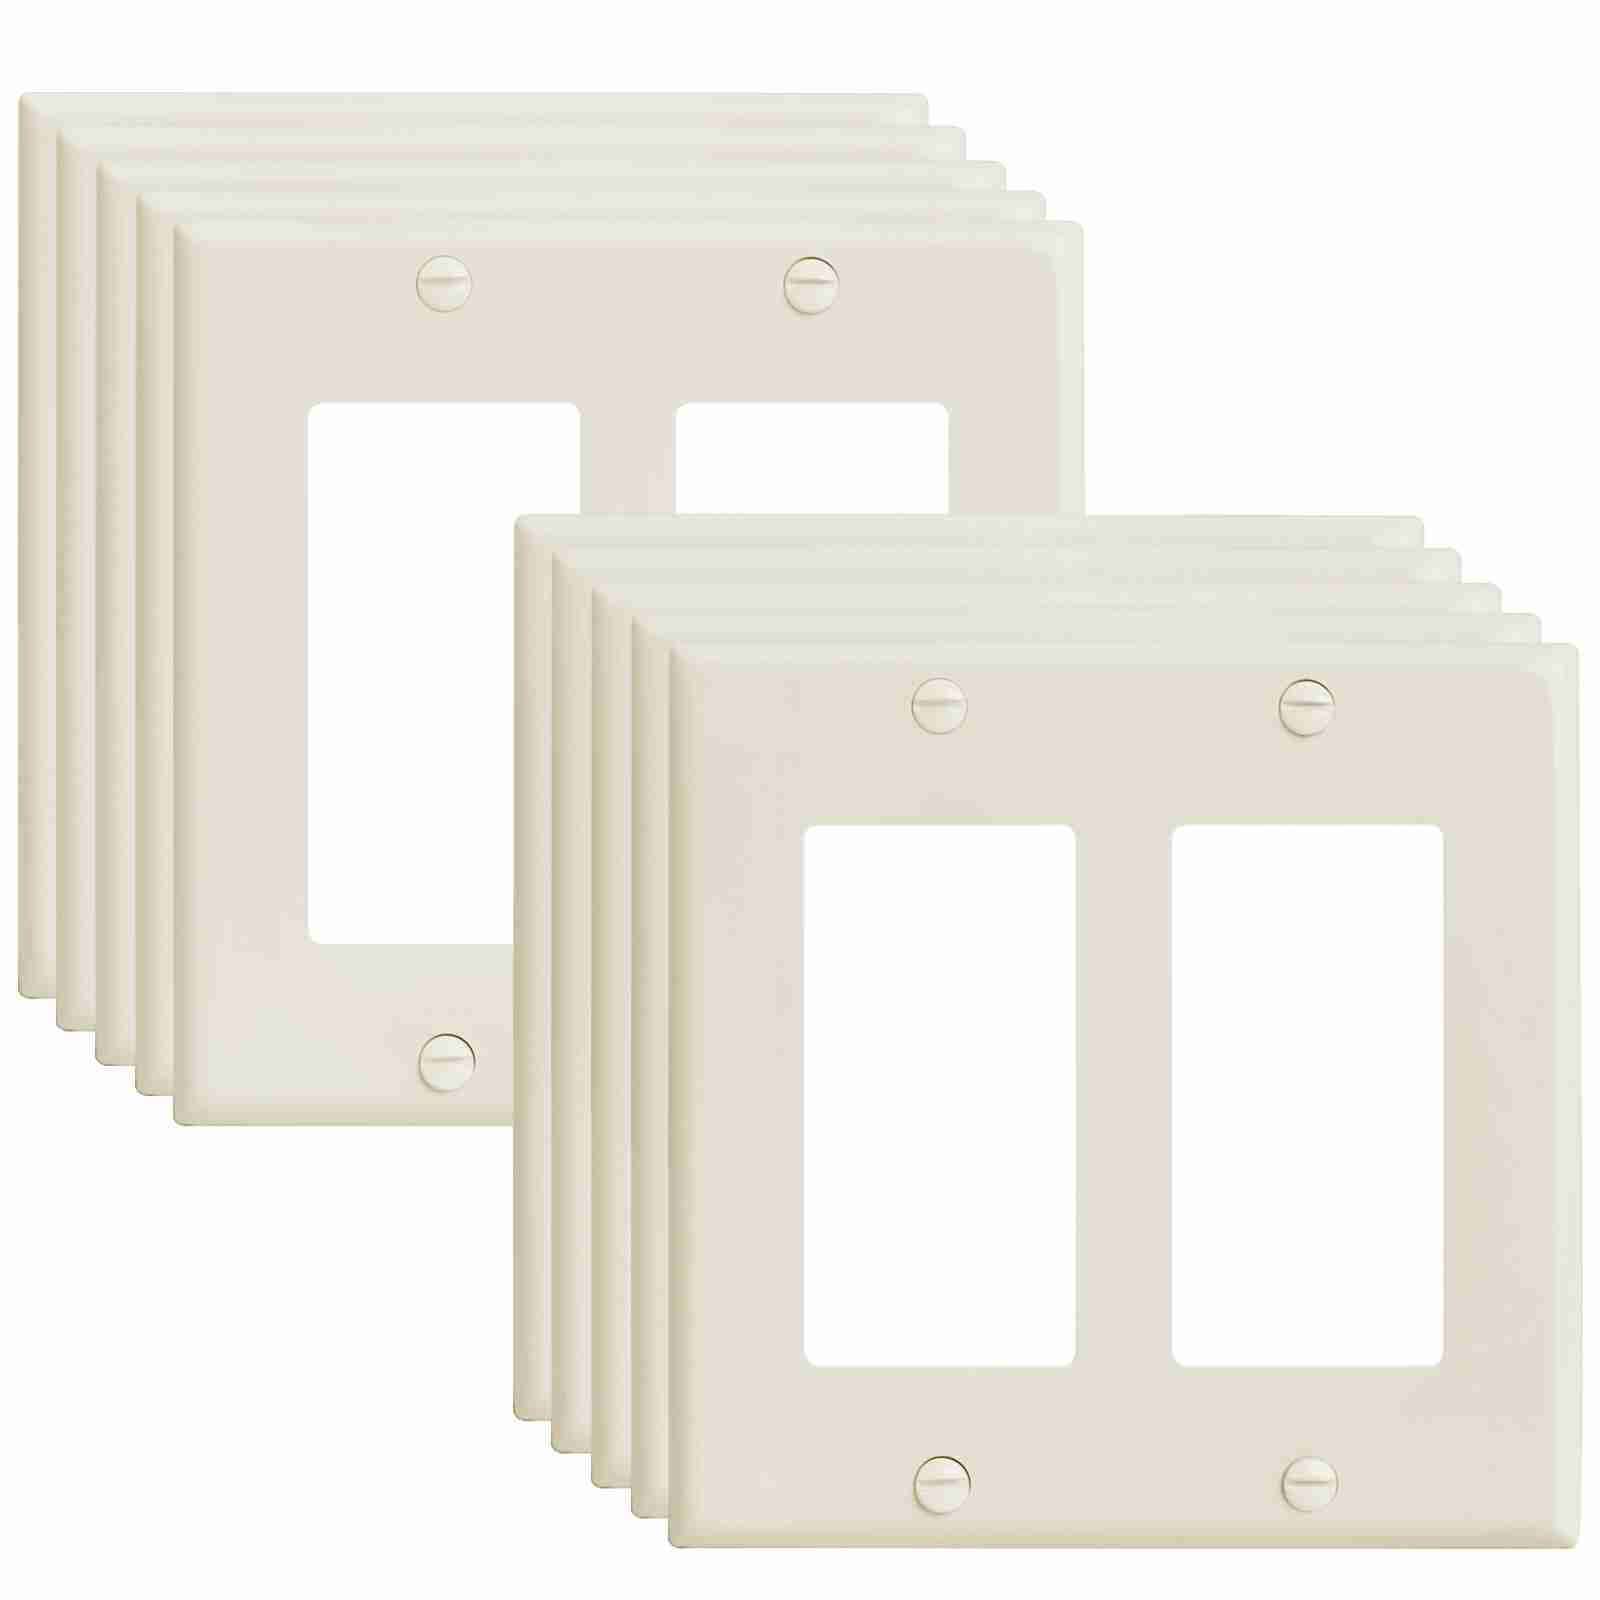 decorator-wall-plate-standard-size-2-gang-cover for cheap